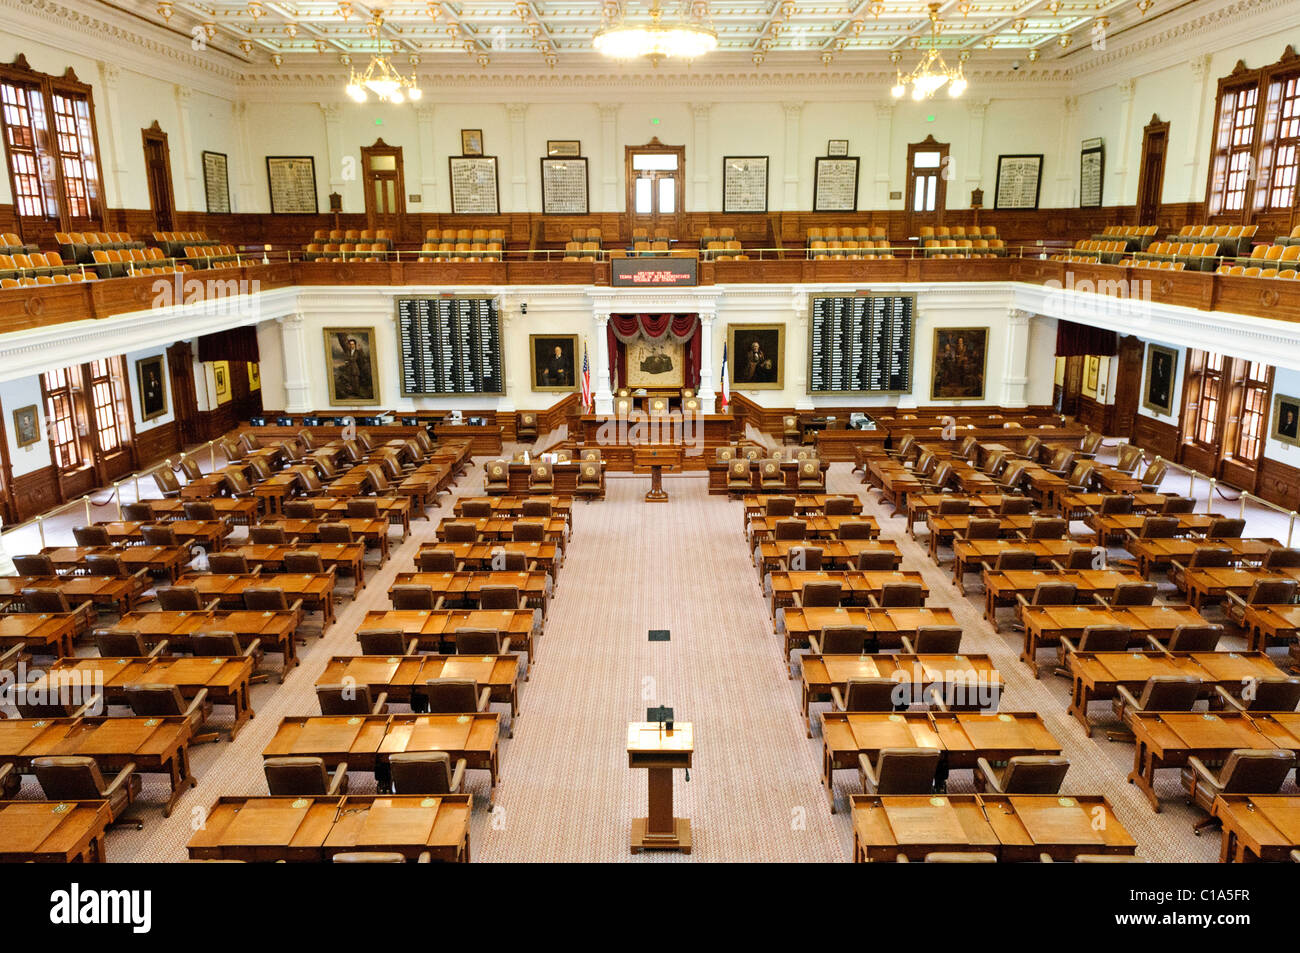 AUSTIN, Texas - The House of Representatives chamber in the Texas State Capitol in Austin, TX. The House has 150 members and a regular session adds up to 140 days a year, and there are no term limits for representatives. Stock Photo